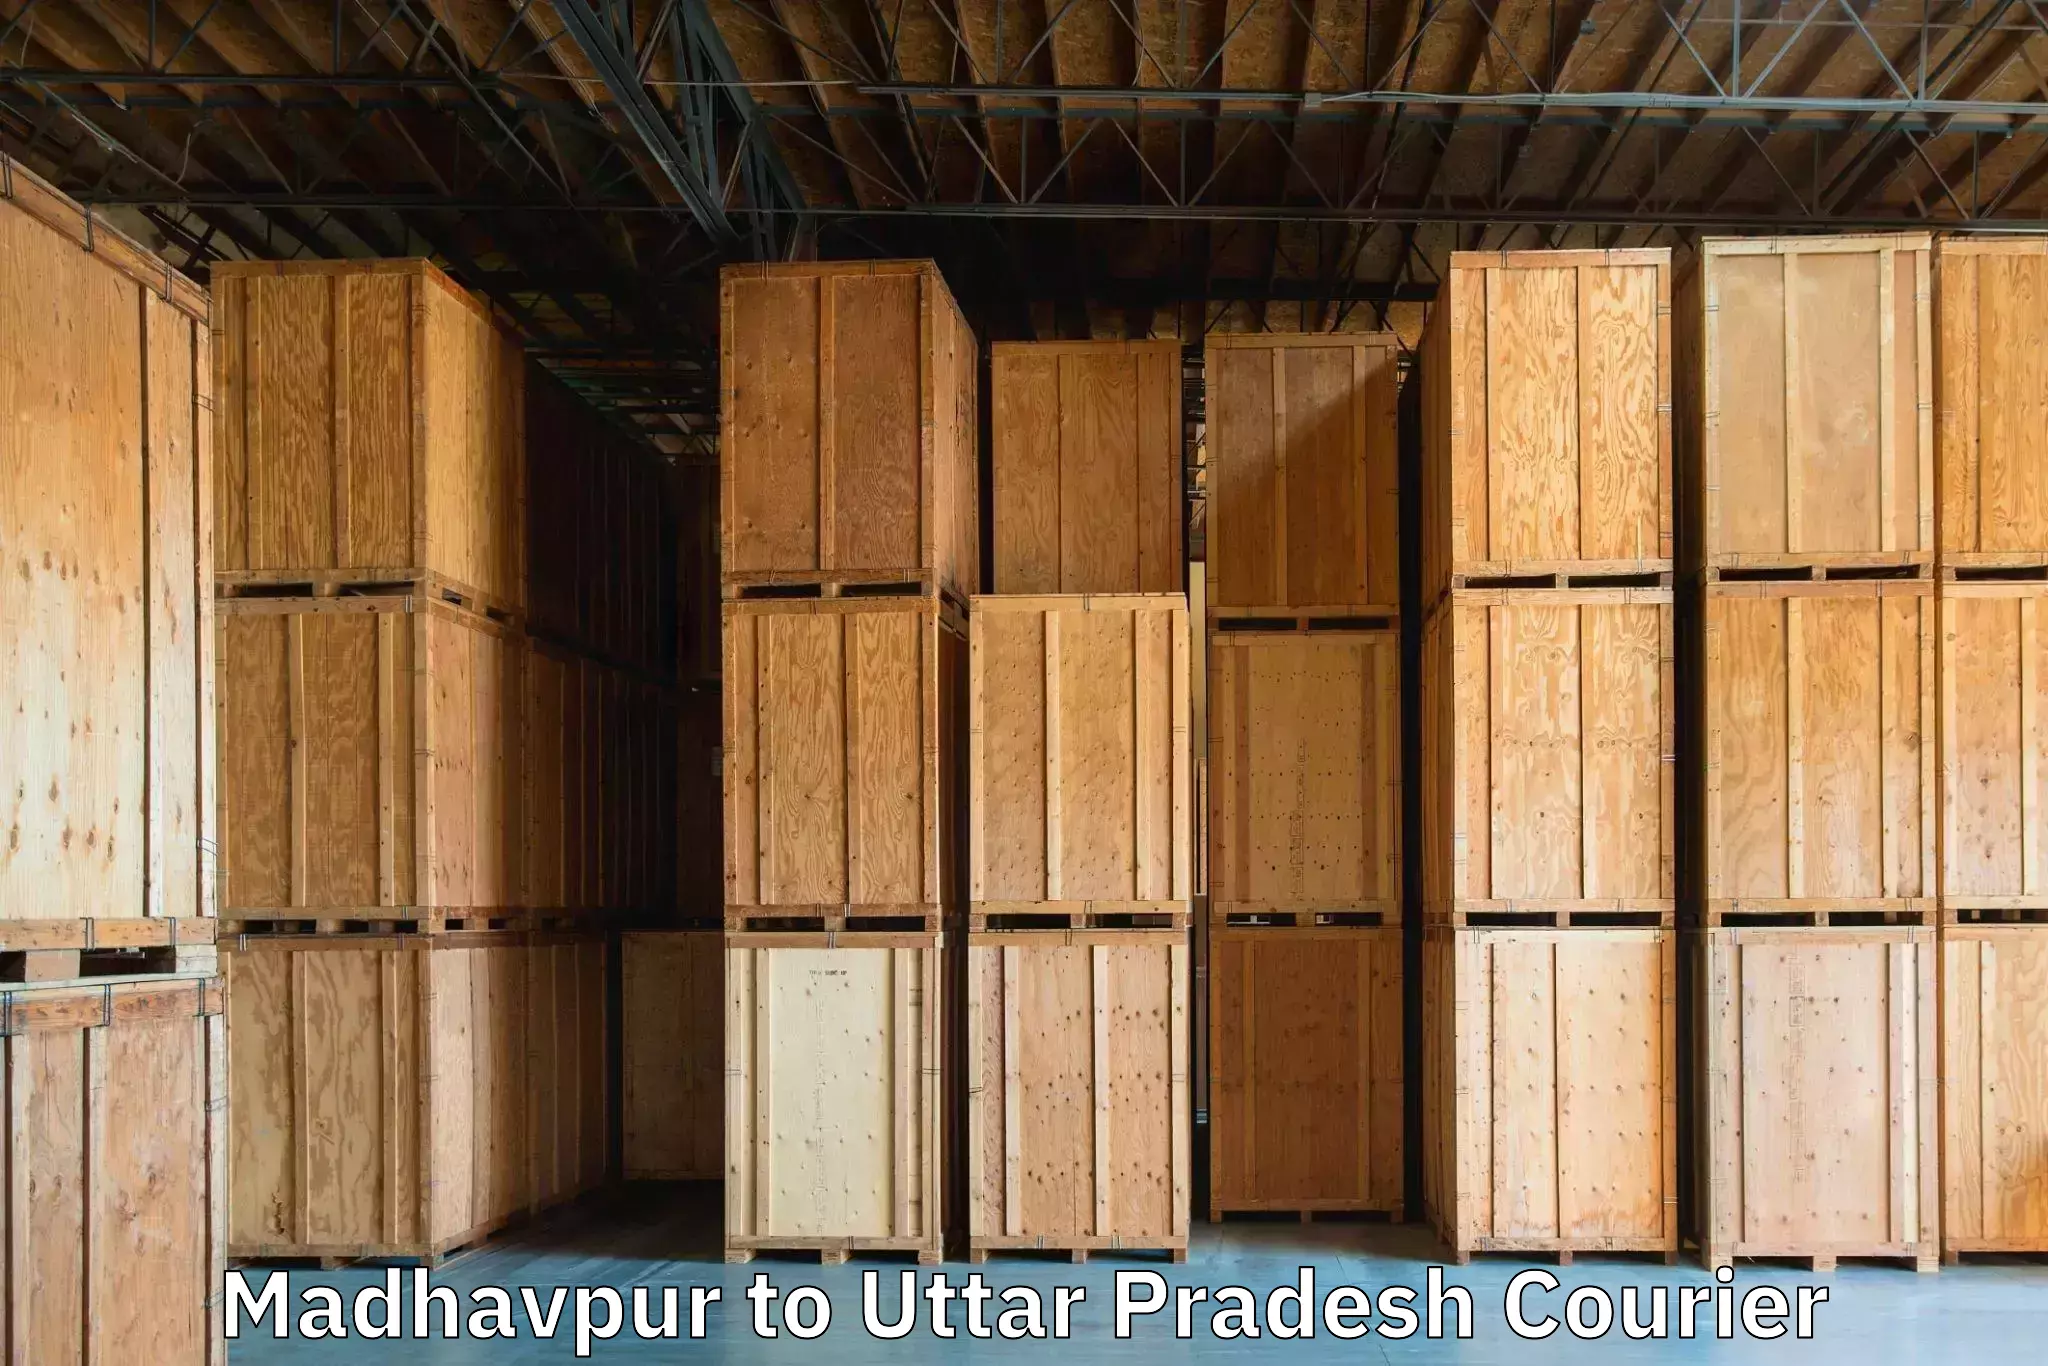 Baggage shipping experience in Madhavpur to Kheragarh